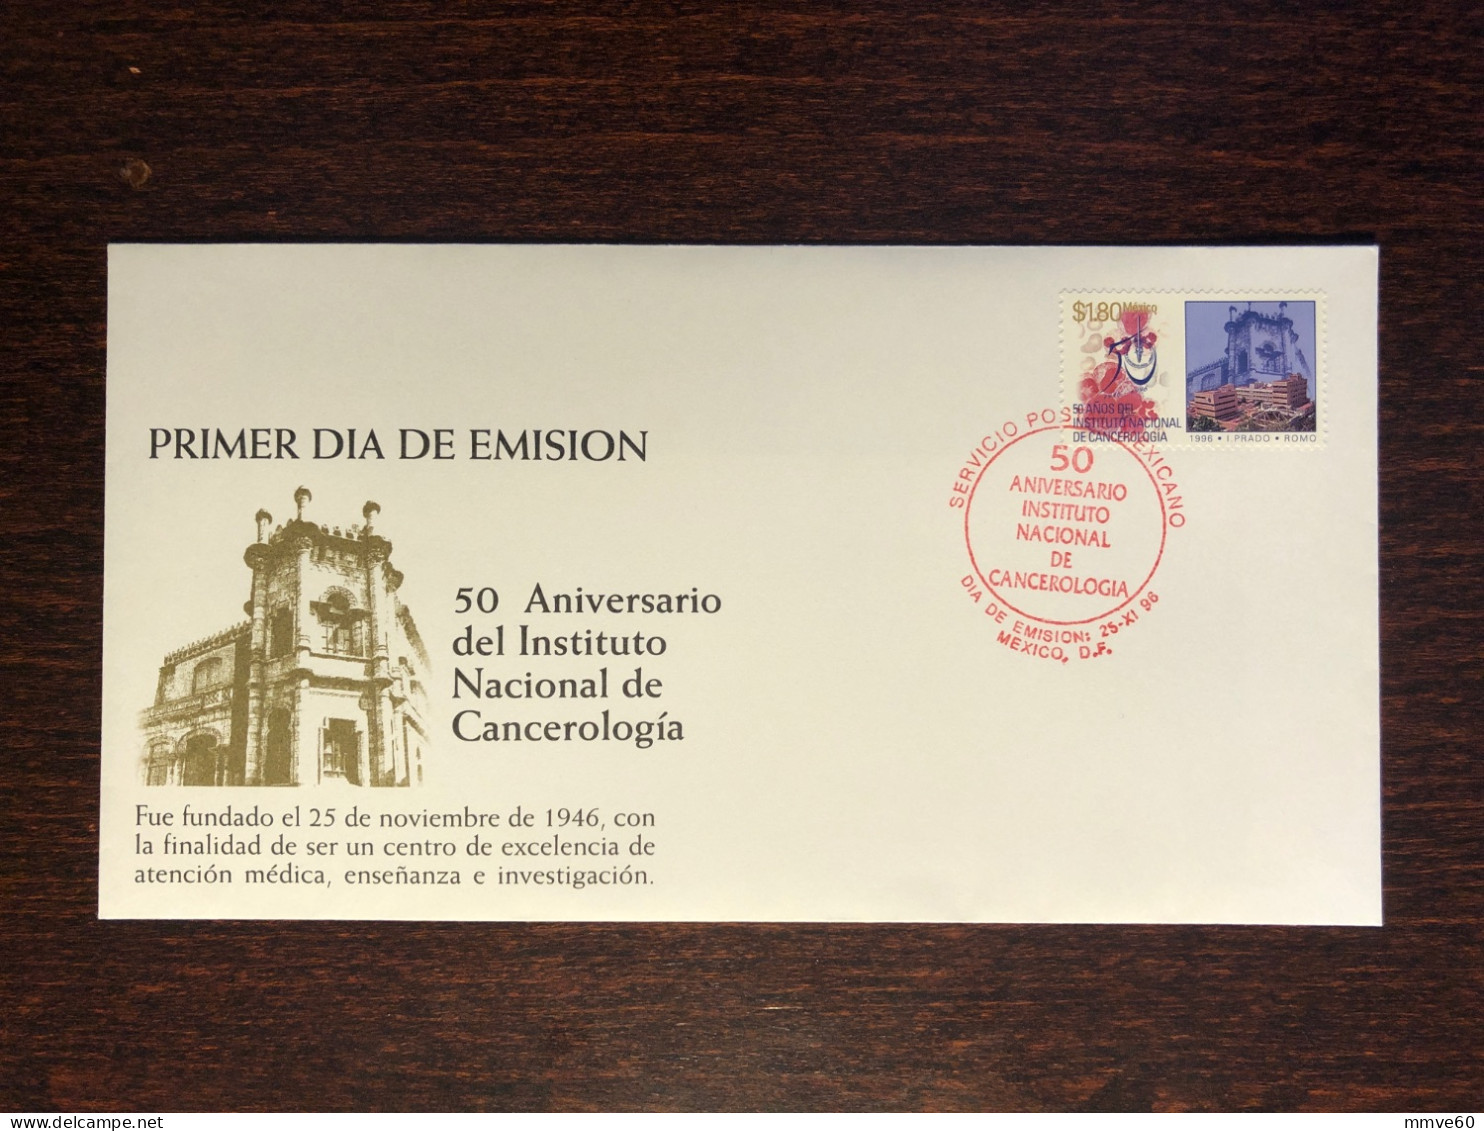 MEXICO FDC COVER 1996 YEAR ONCOLOGY CANCER HEALTH MEDICINE STAMPS - Mexico